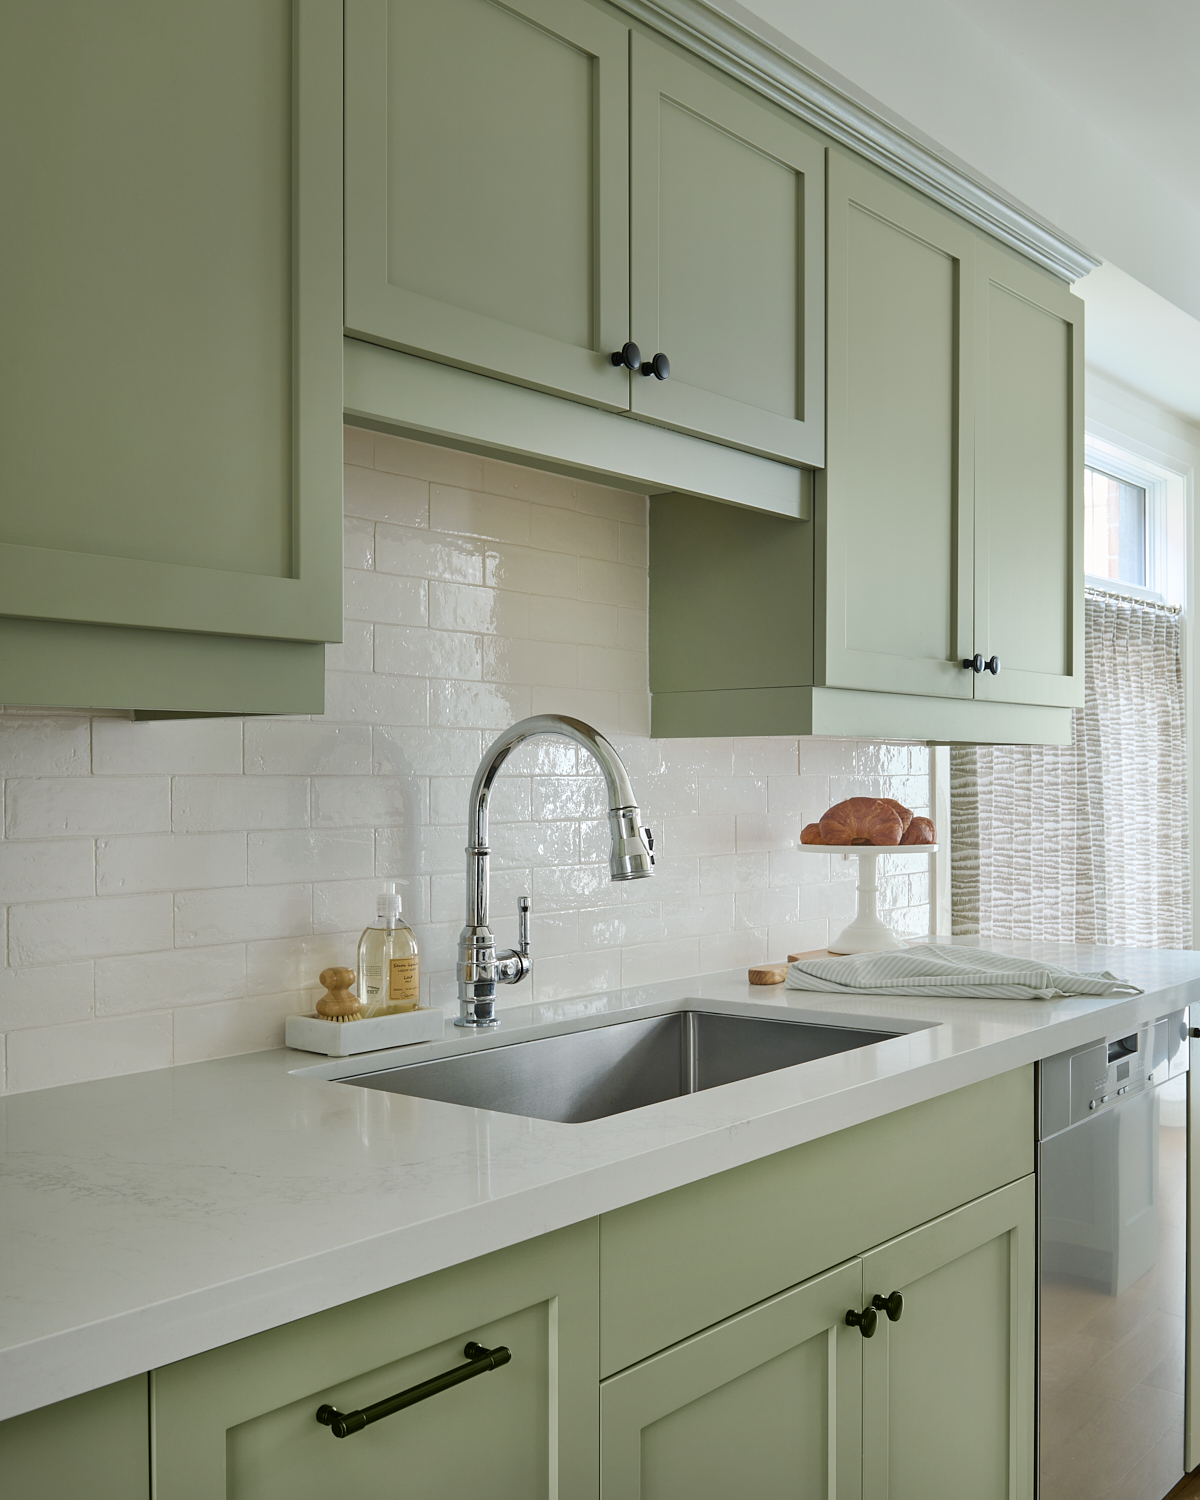 kitchen with light green cabinets, oak wood floors, pretty chrome faucet, white countertops and tiled backsplash